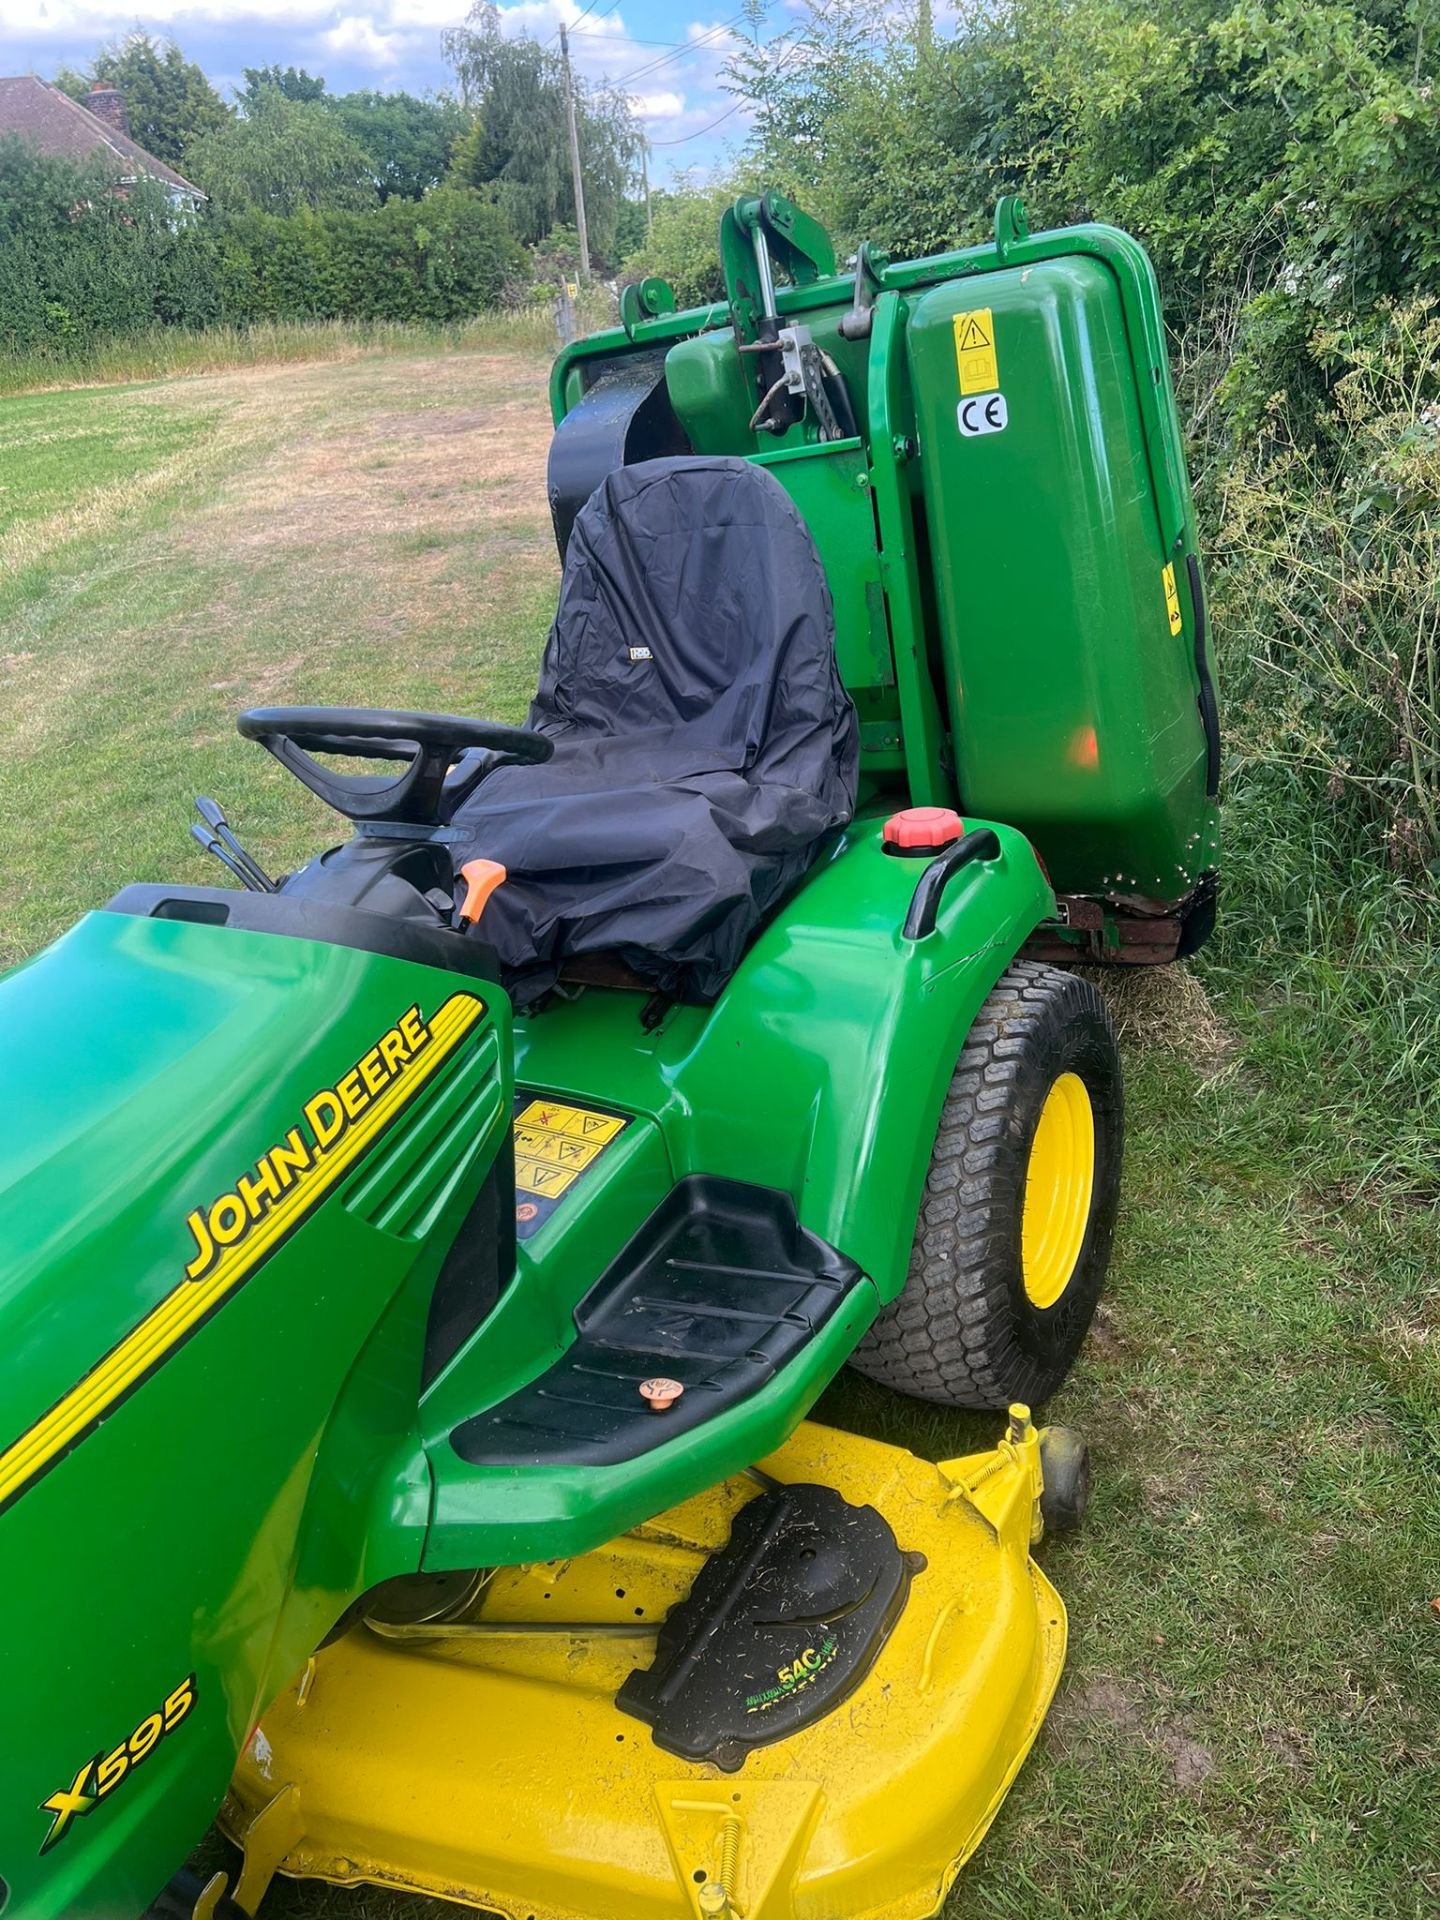 JOHN DEERE X595 4x4 RIDE ON LAWN MOWER WITH COLLECTOR *PLUS VAT* - Image 6 of 6